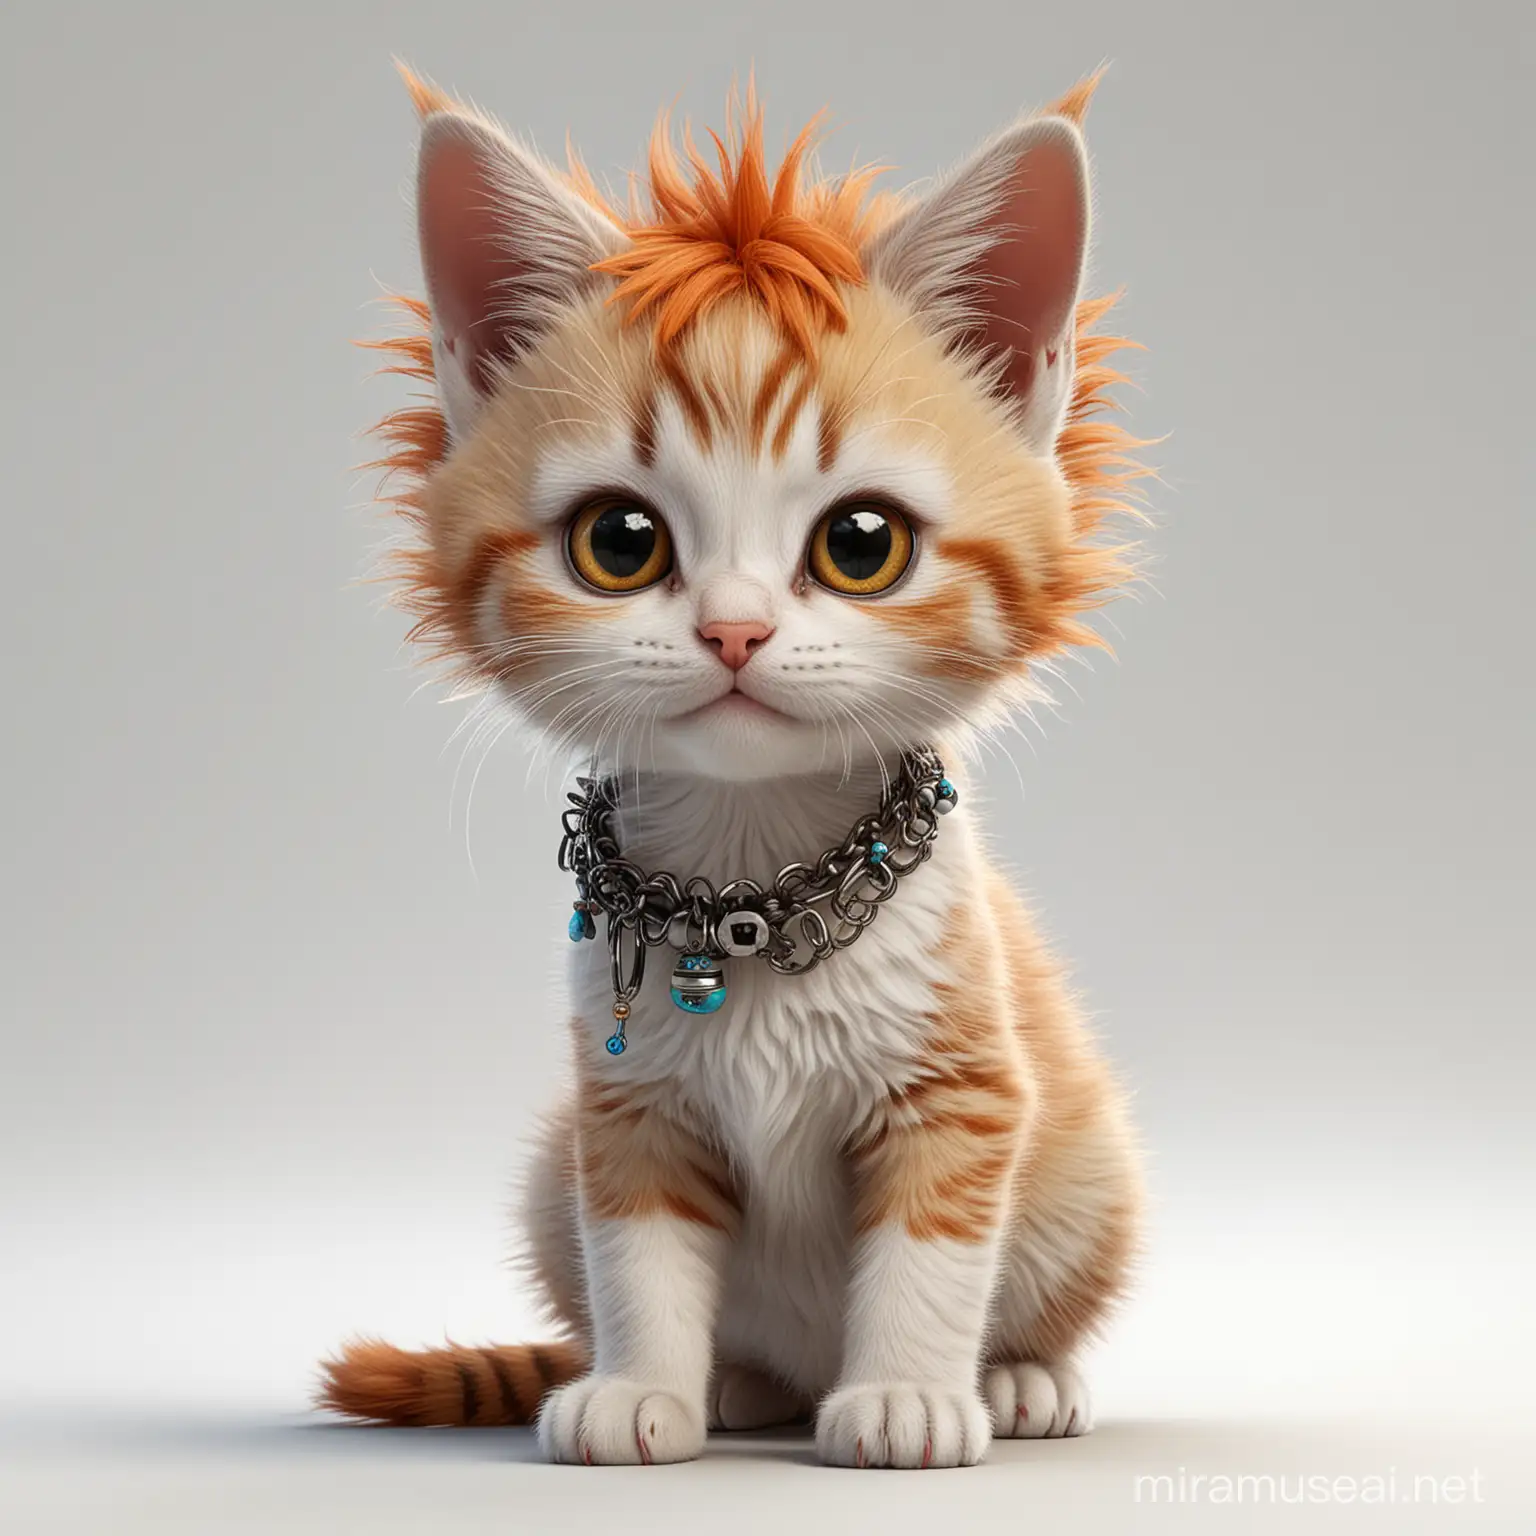 Punky Kitten with Earrings and Nose Ring in Realistic Digital Art Style